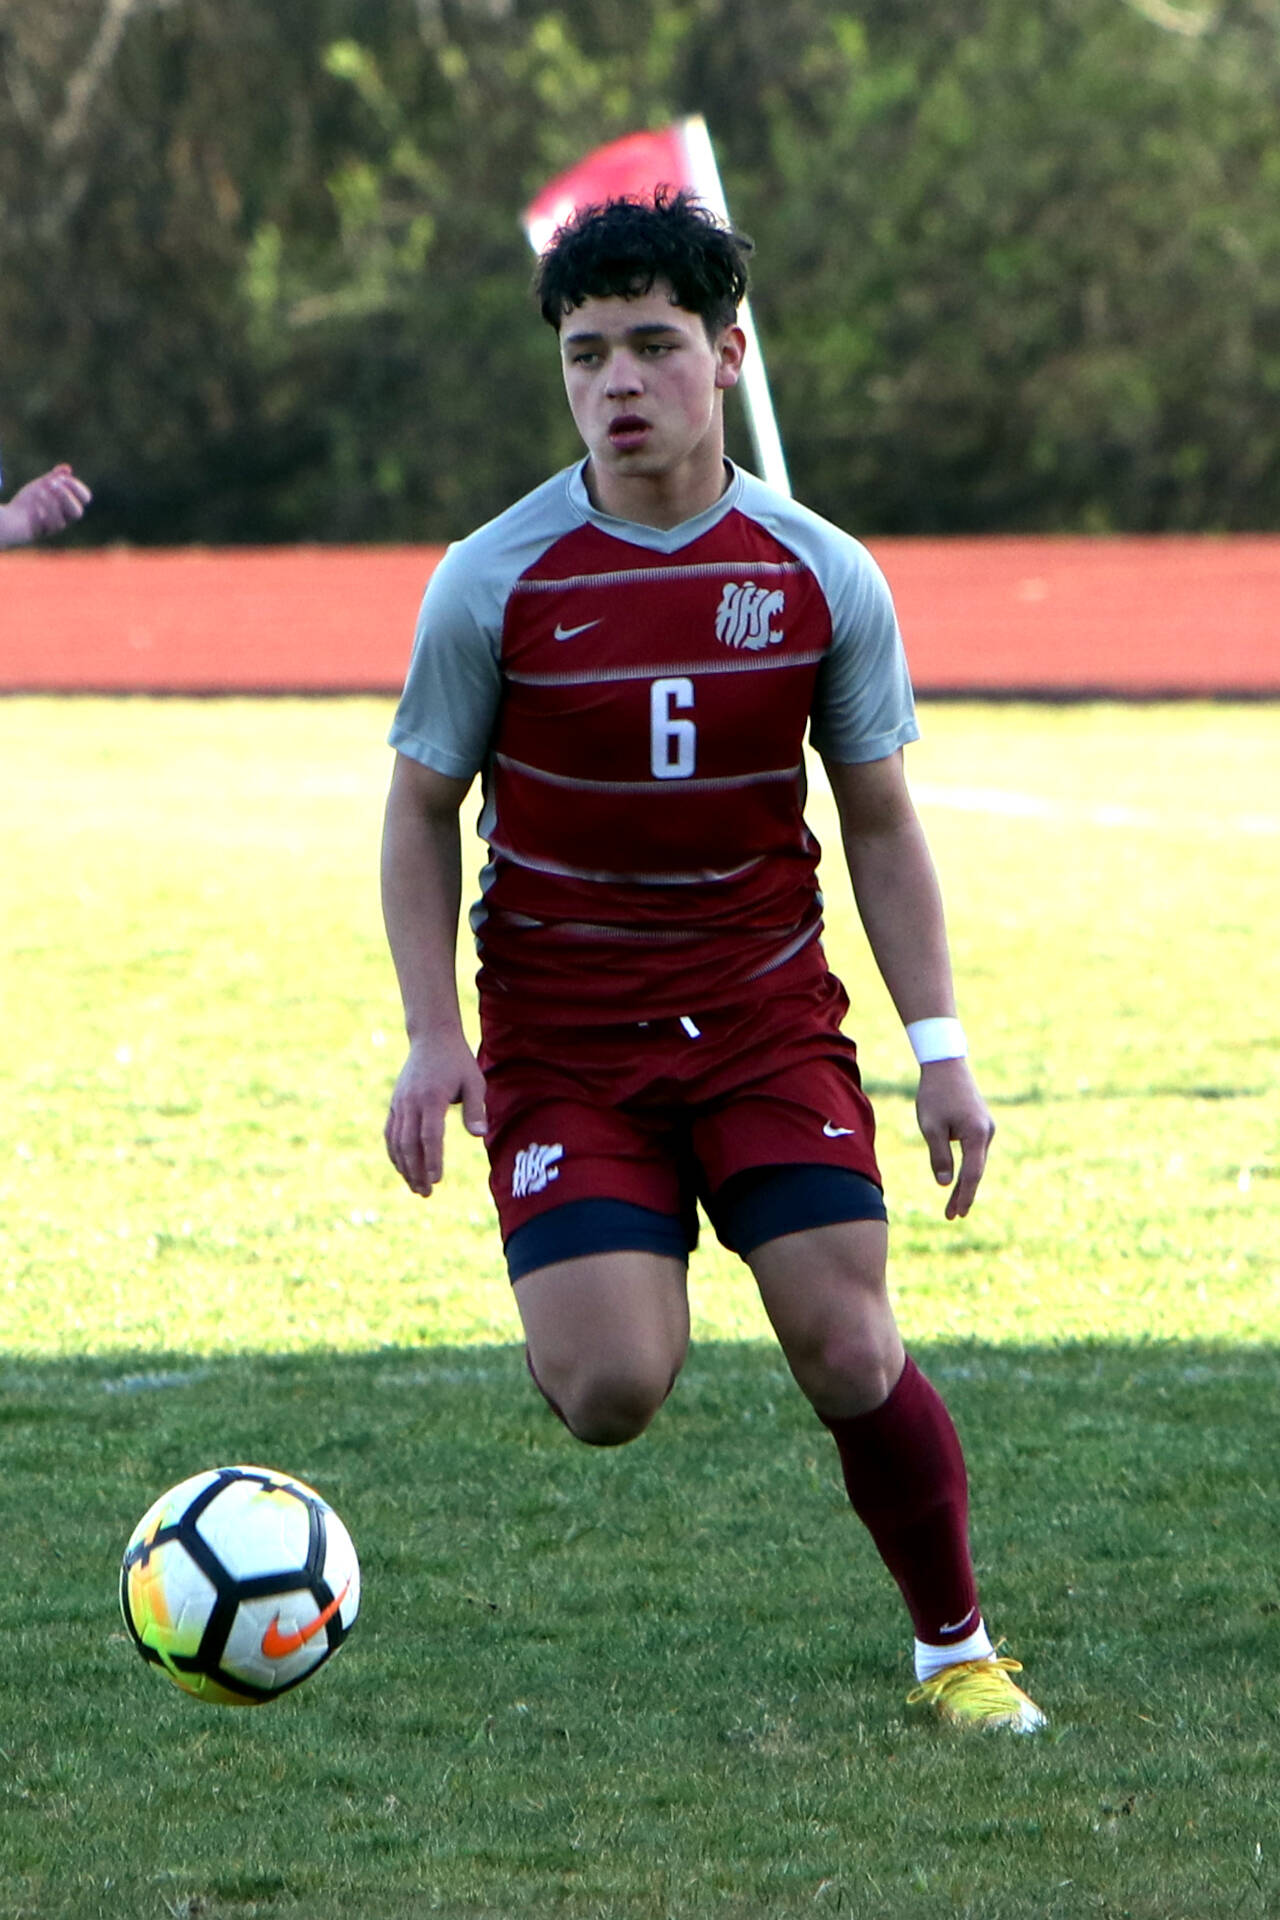 PHOTO BY BEN WINKELMAN
Hoquiam’s Brannon Gonzales, seen here in a file photo, scored three goals — including the game-winner in the second overtime period — to lead the Grizzlies to a 3-2 win over Raymond-South Bend on Monday in Hoquiam.